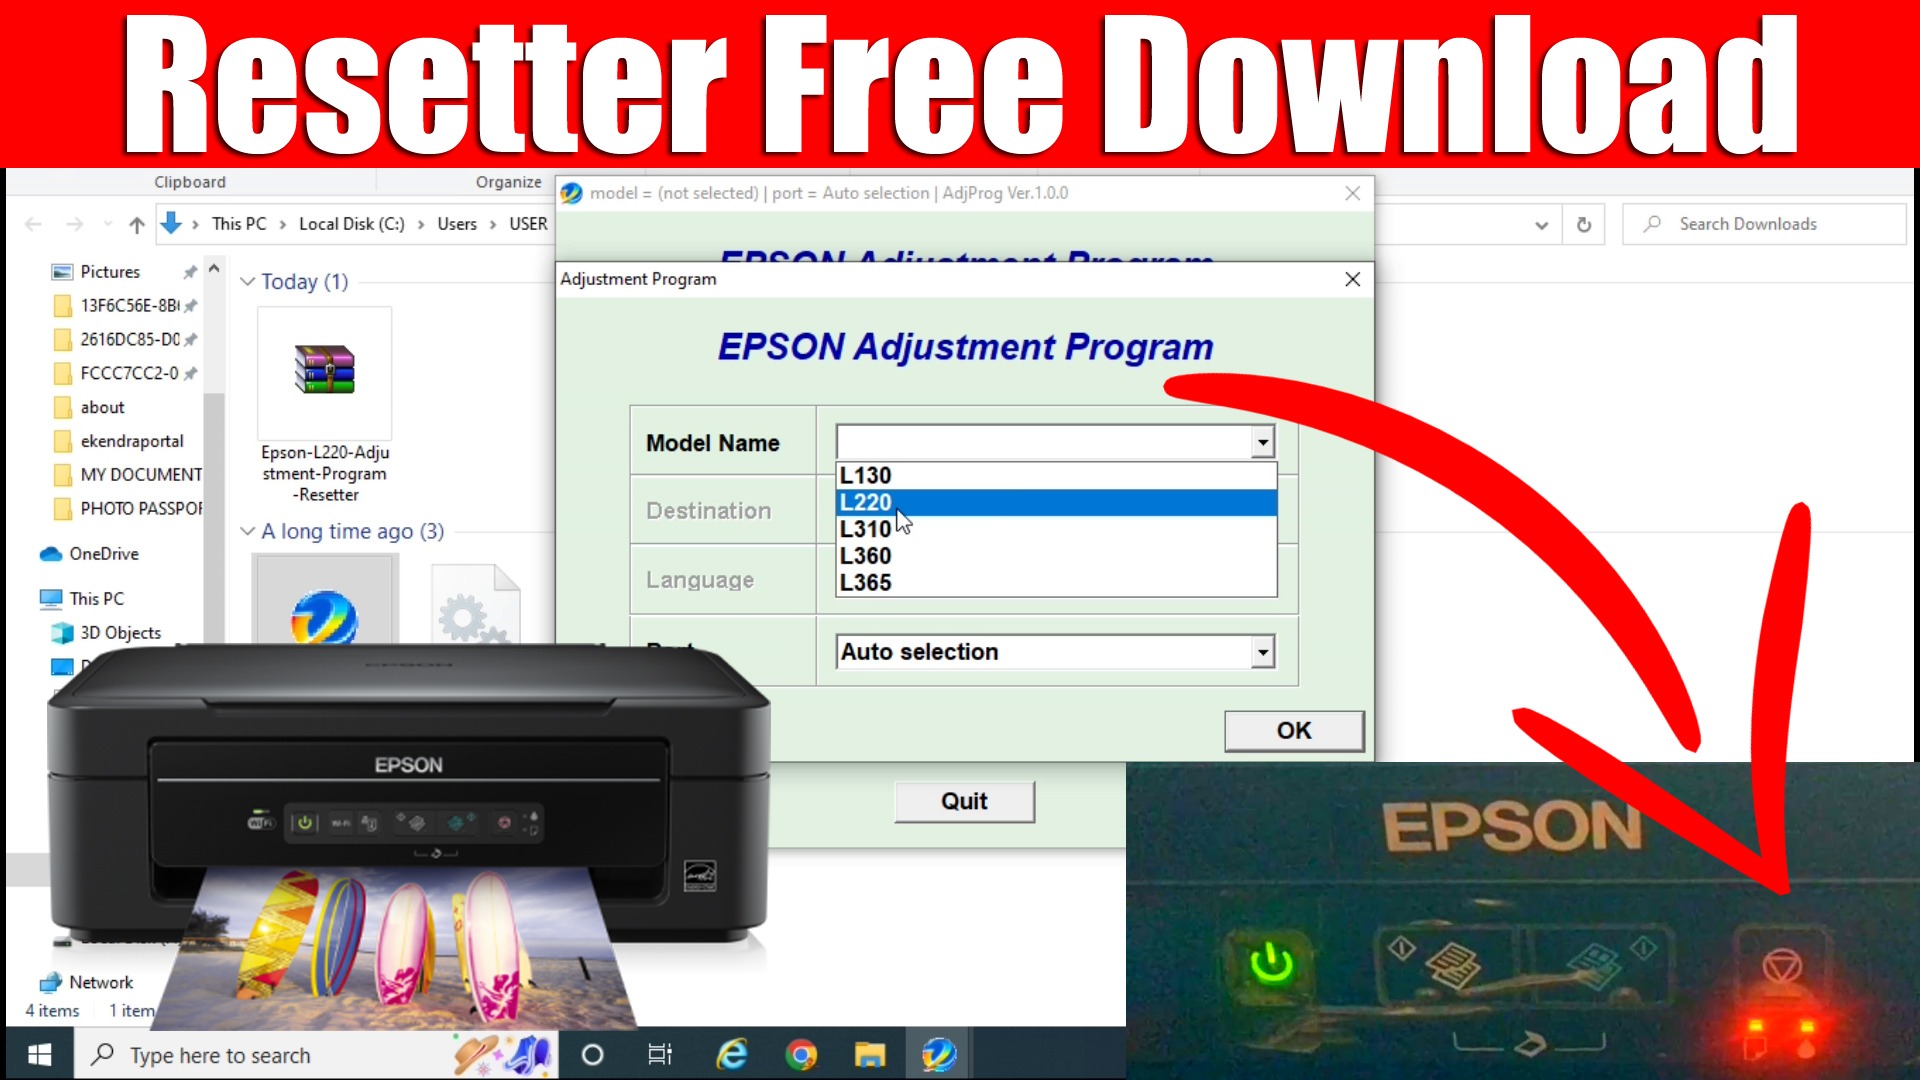 epson resetter software free download mac